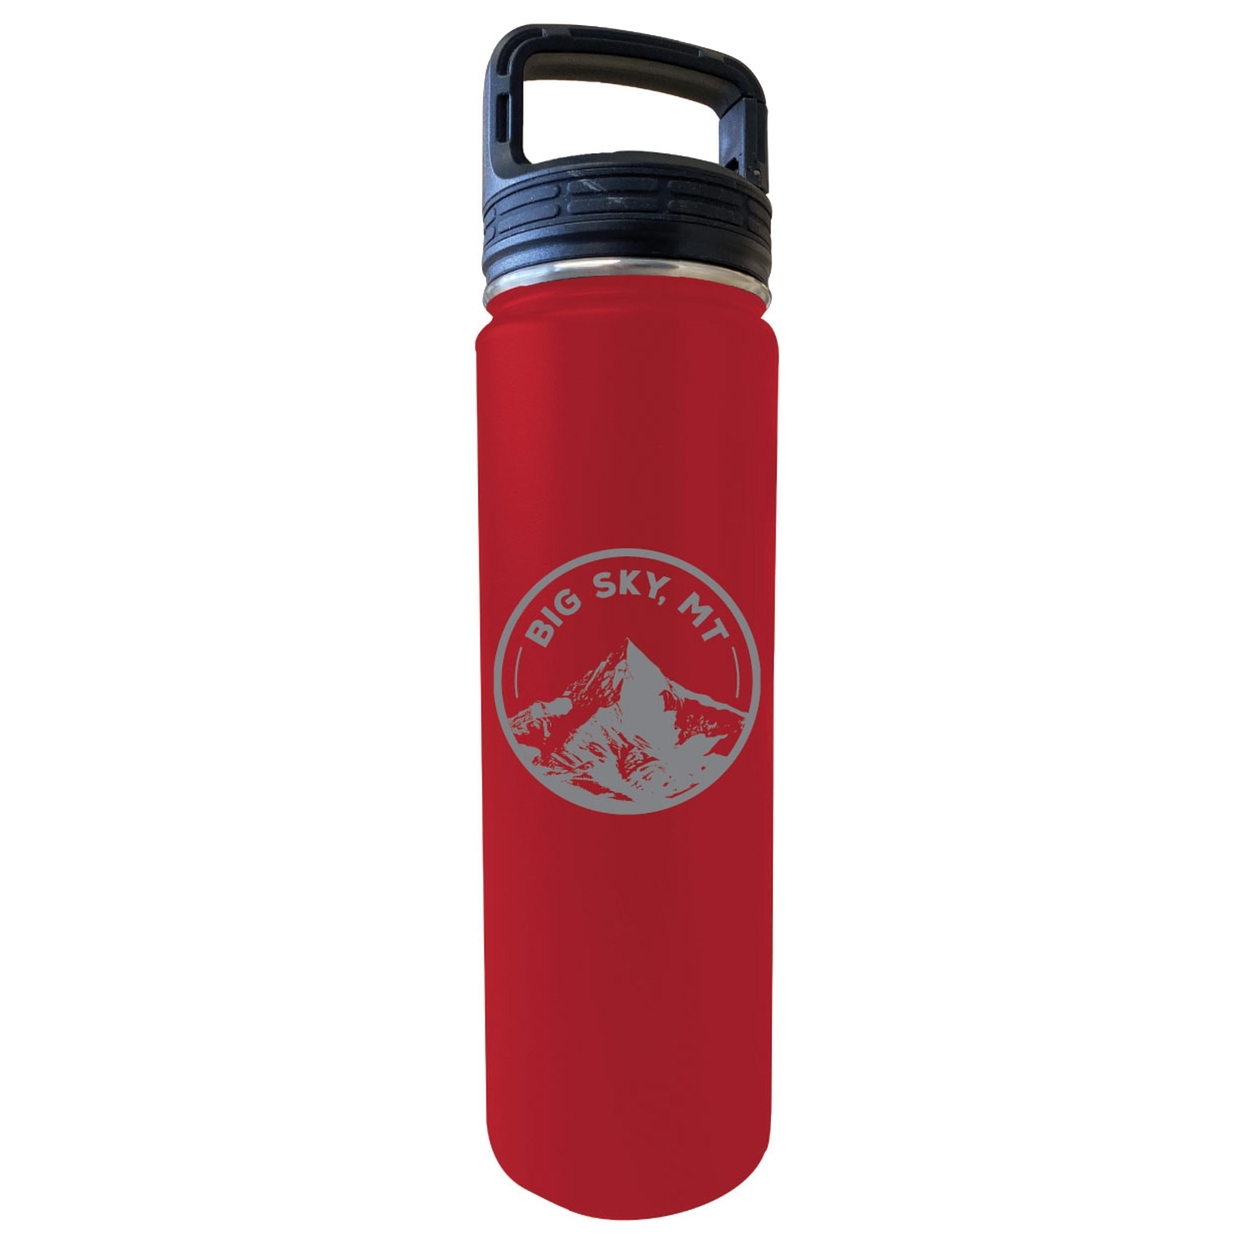 Big Sky Montana Souvenir 32 Oz Engraved Insulated Stainless Steel Tumbler - Red,,Single Unit